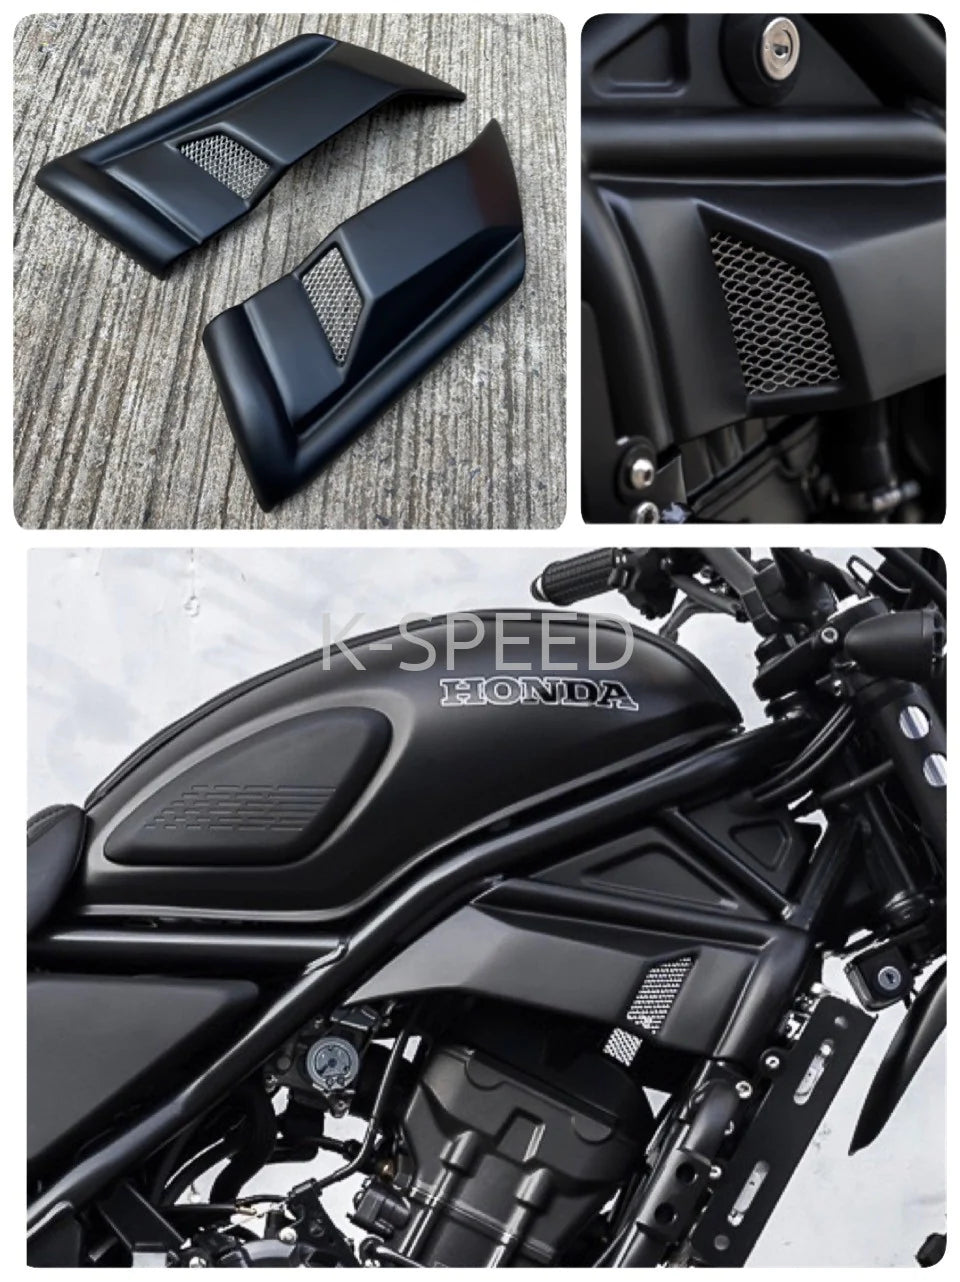 K-SPEED CL11 ENGINE COVER FOR HONDA CL250, 300 & 500